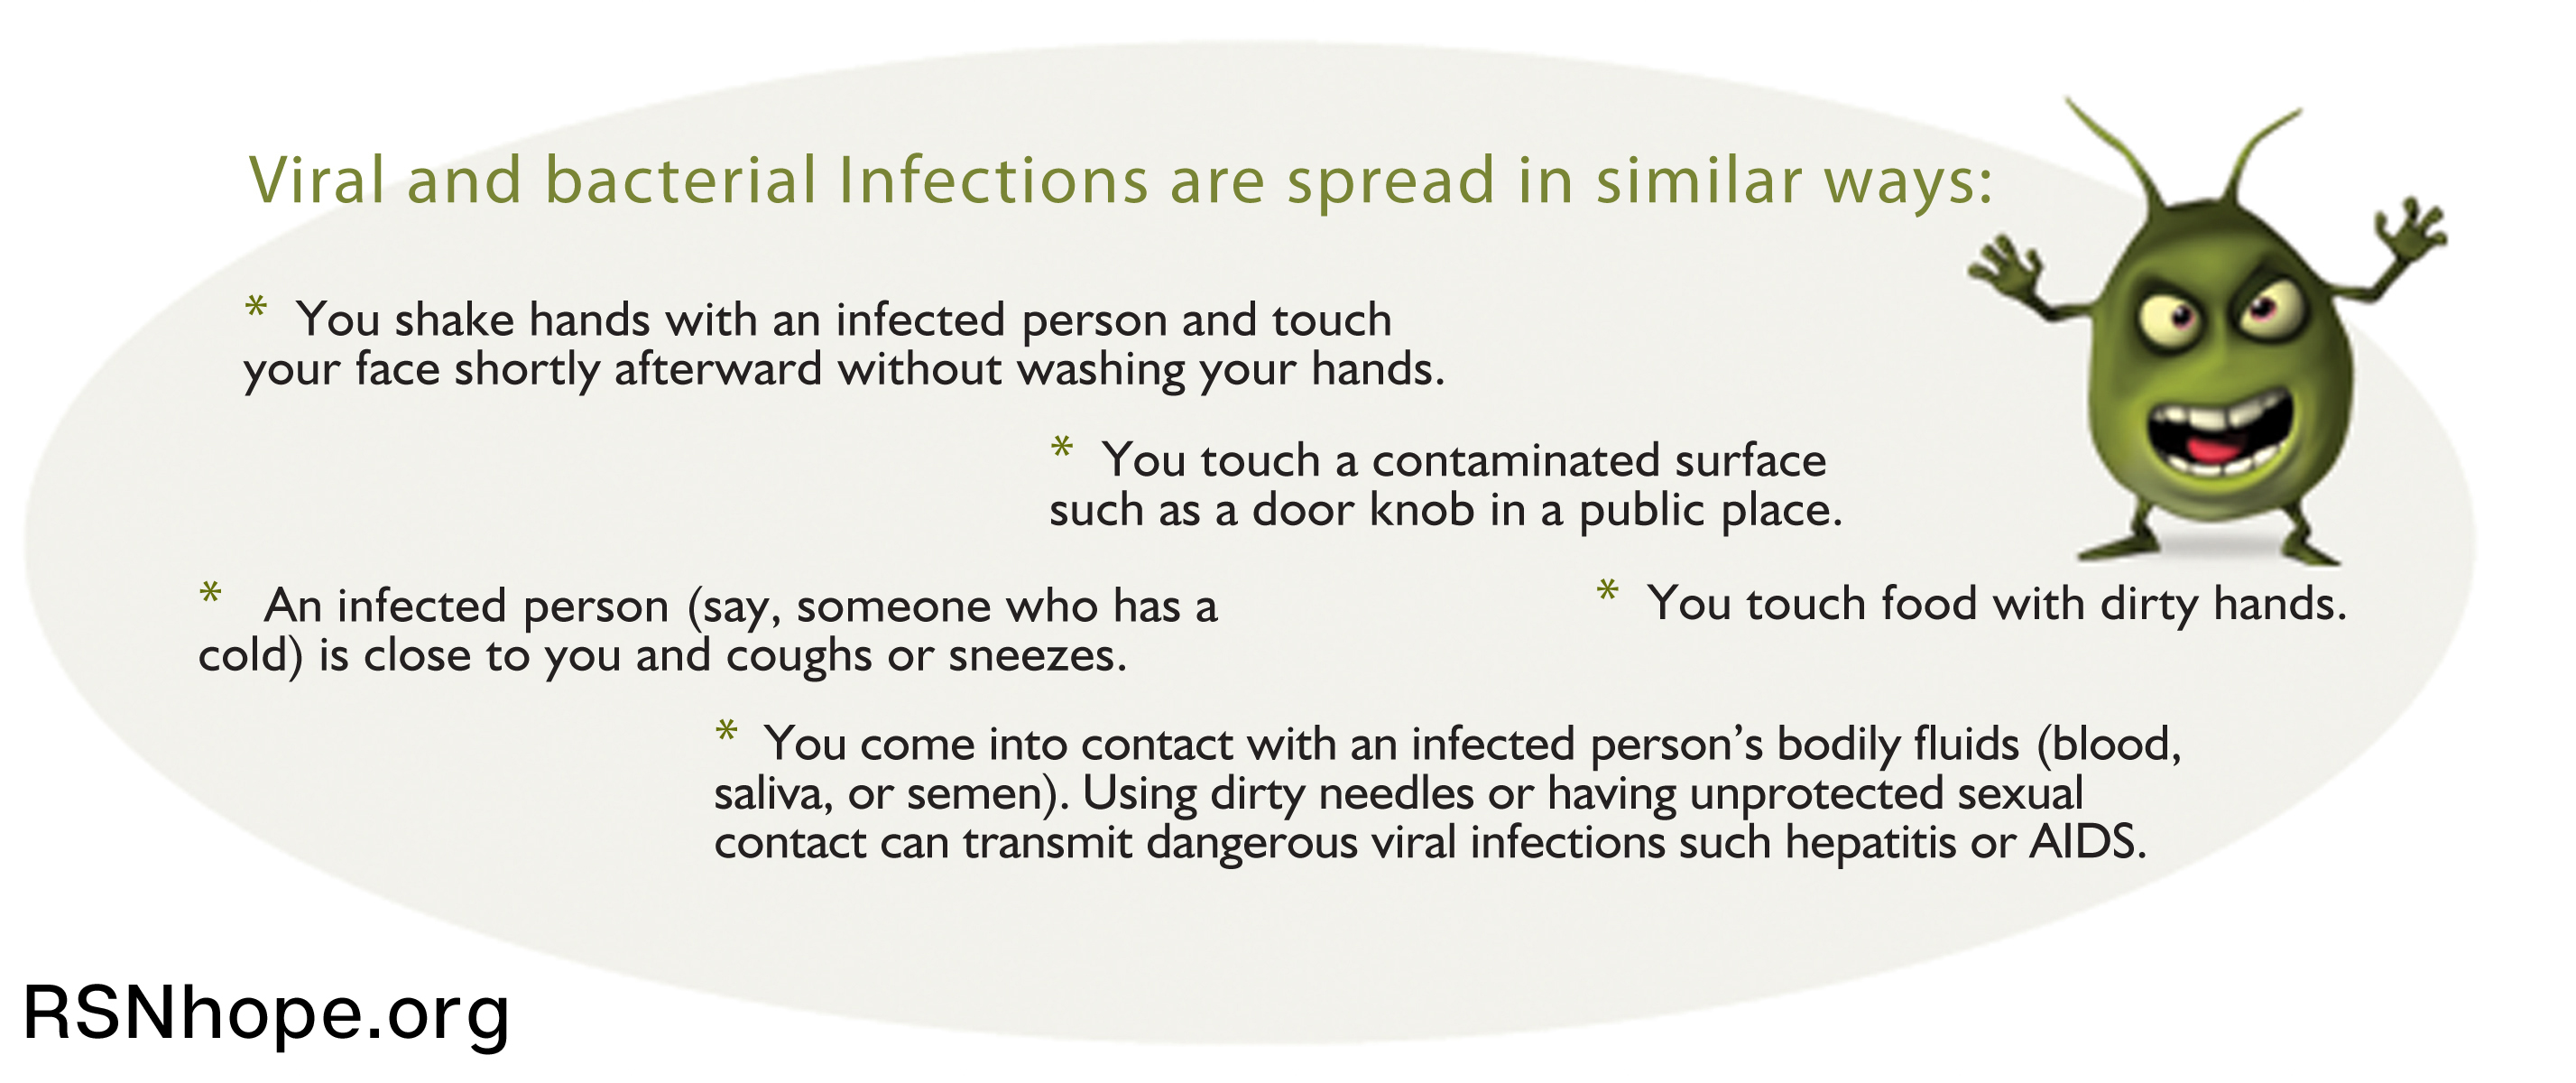 Avoid infection - how infections are spread